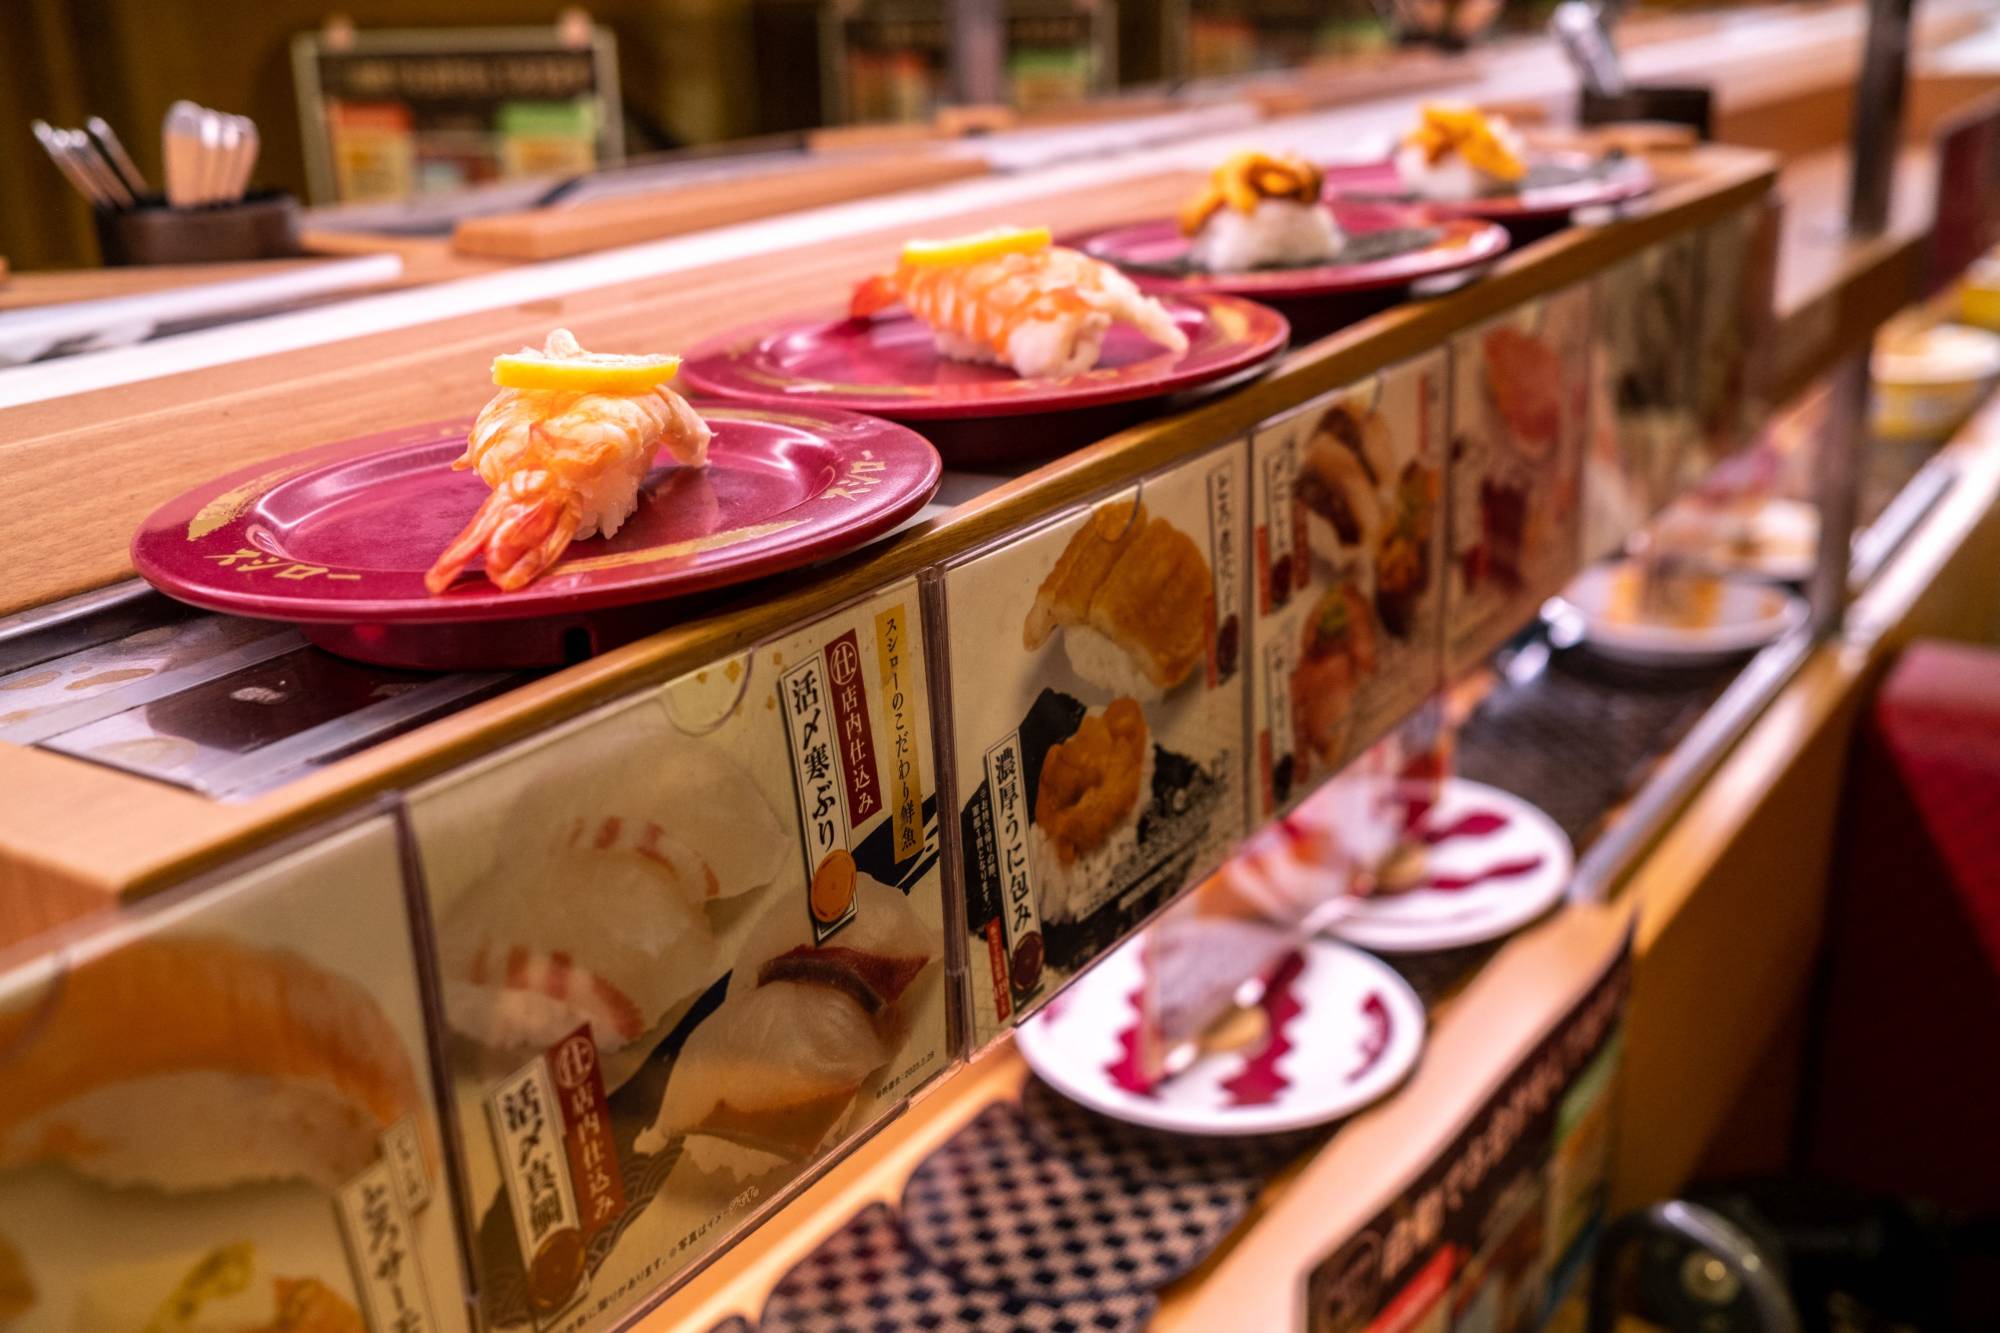 Plates of sushi are seen on a conveyor belt at a sushi chain restaurant in Tokyo on Friday. | AFP-JIJI